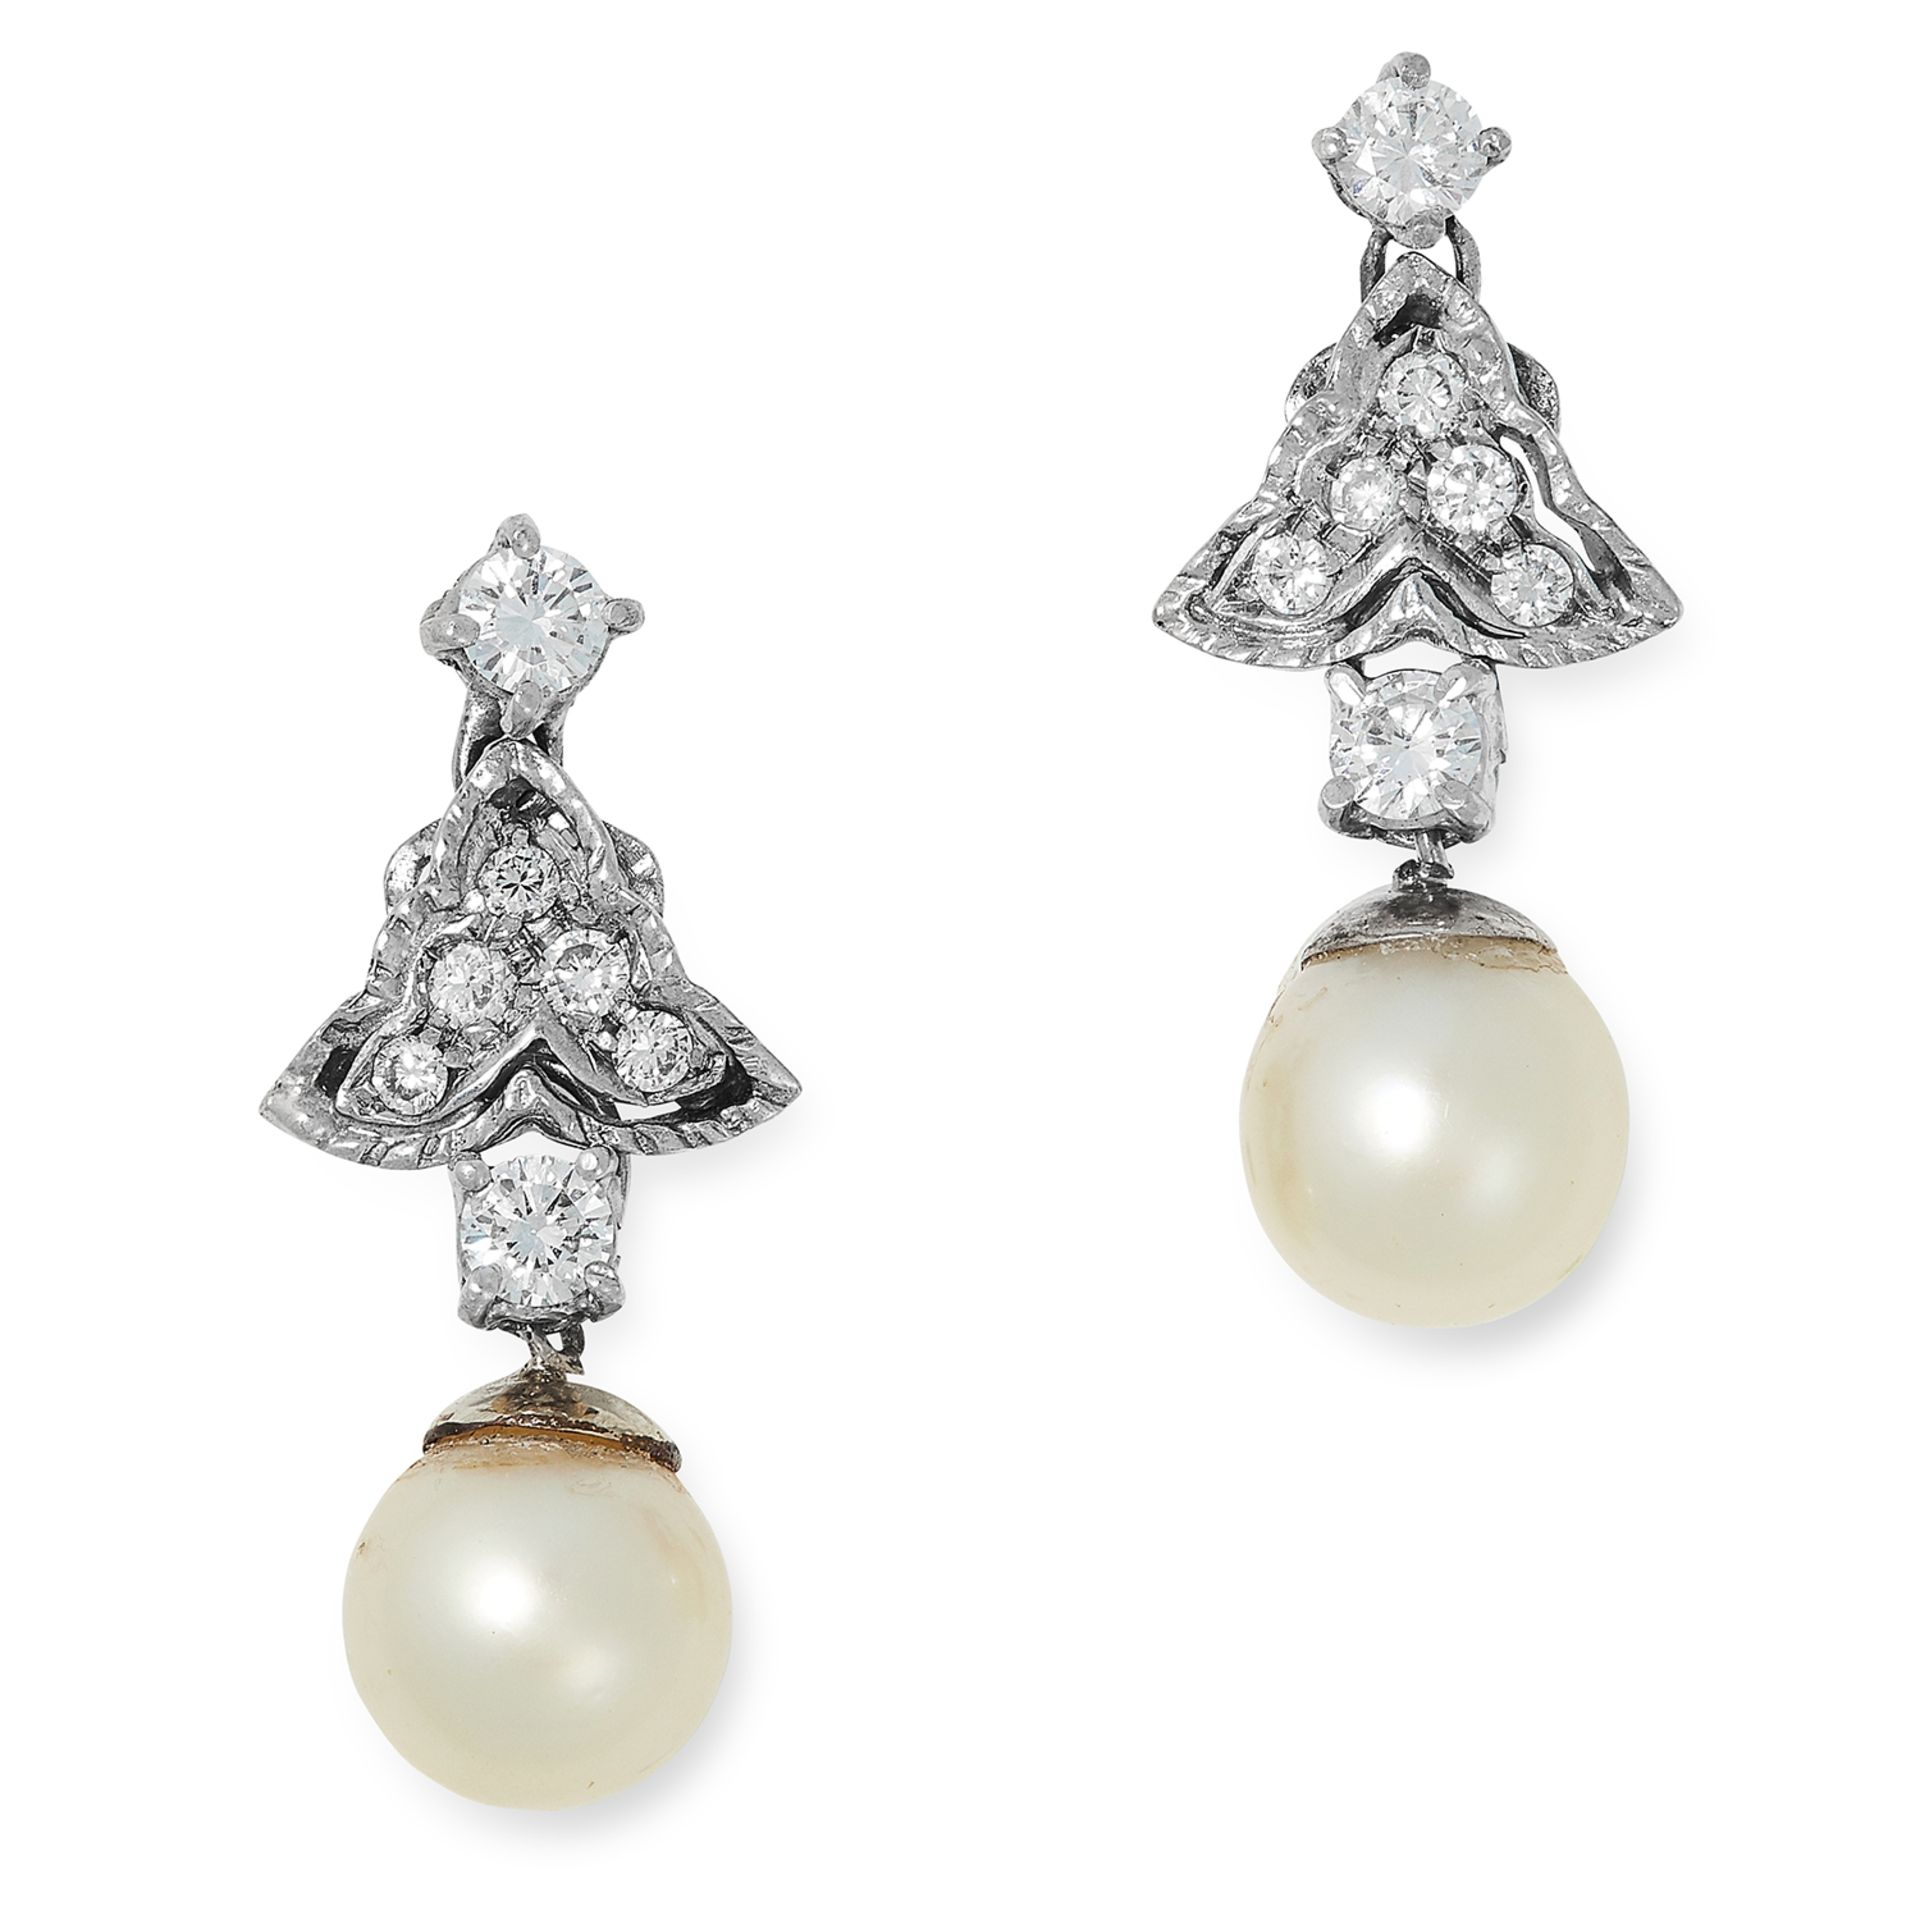 PEARL AND DIAMOND DROP EARRINGS each set with round cut diamonds and suspending a pearl drop, 2.5cm,